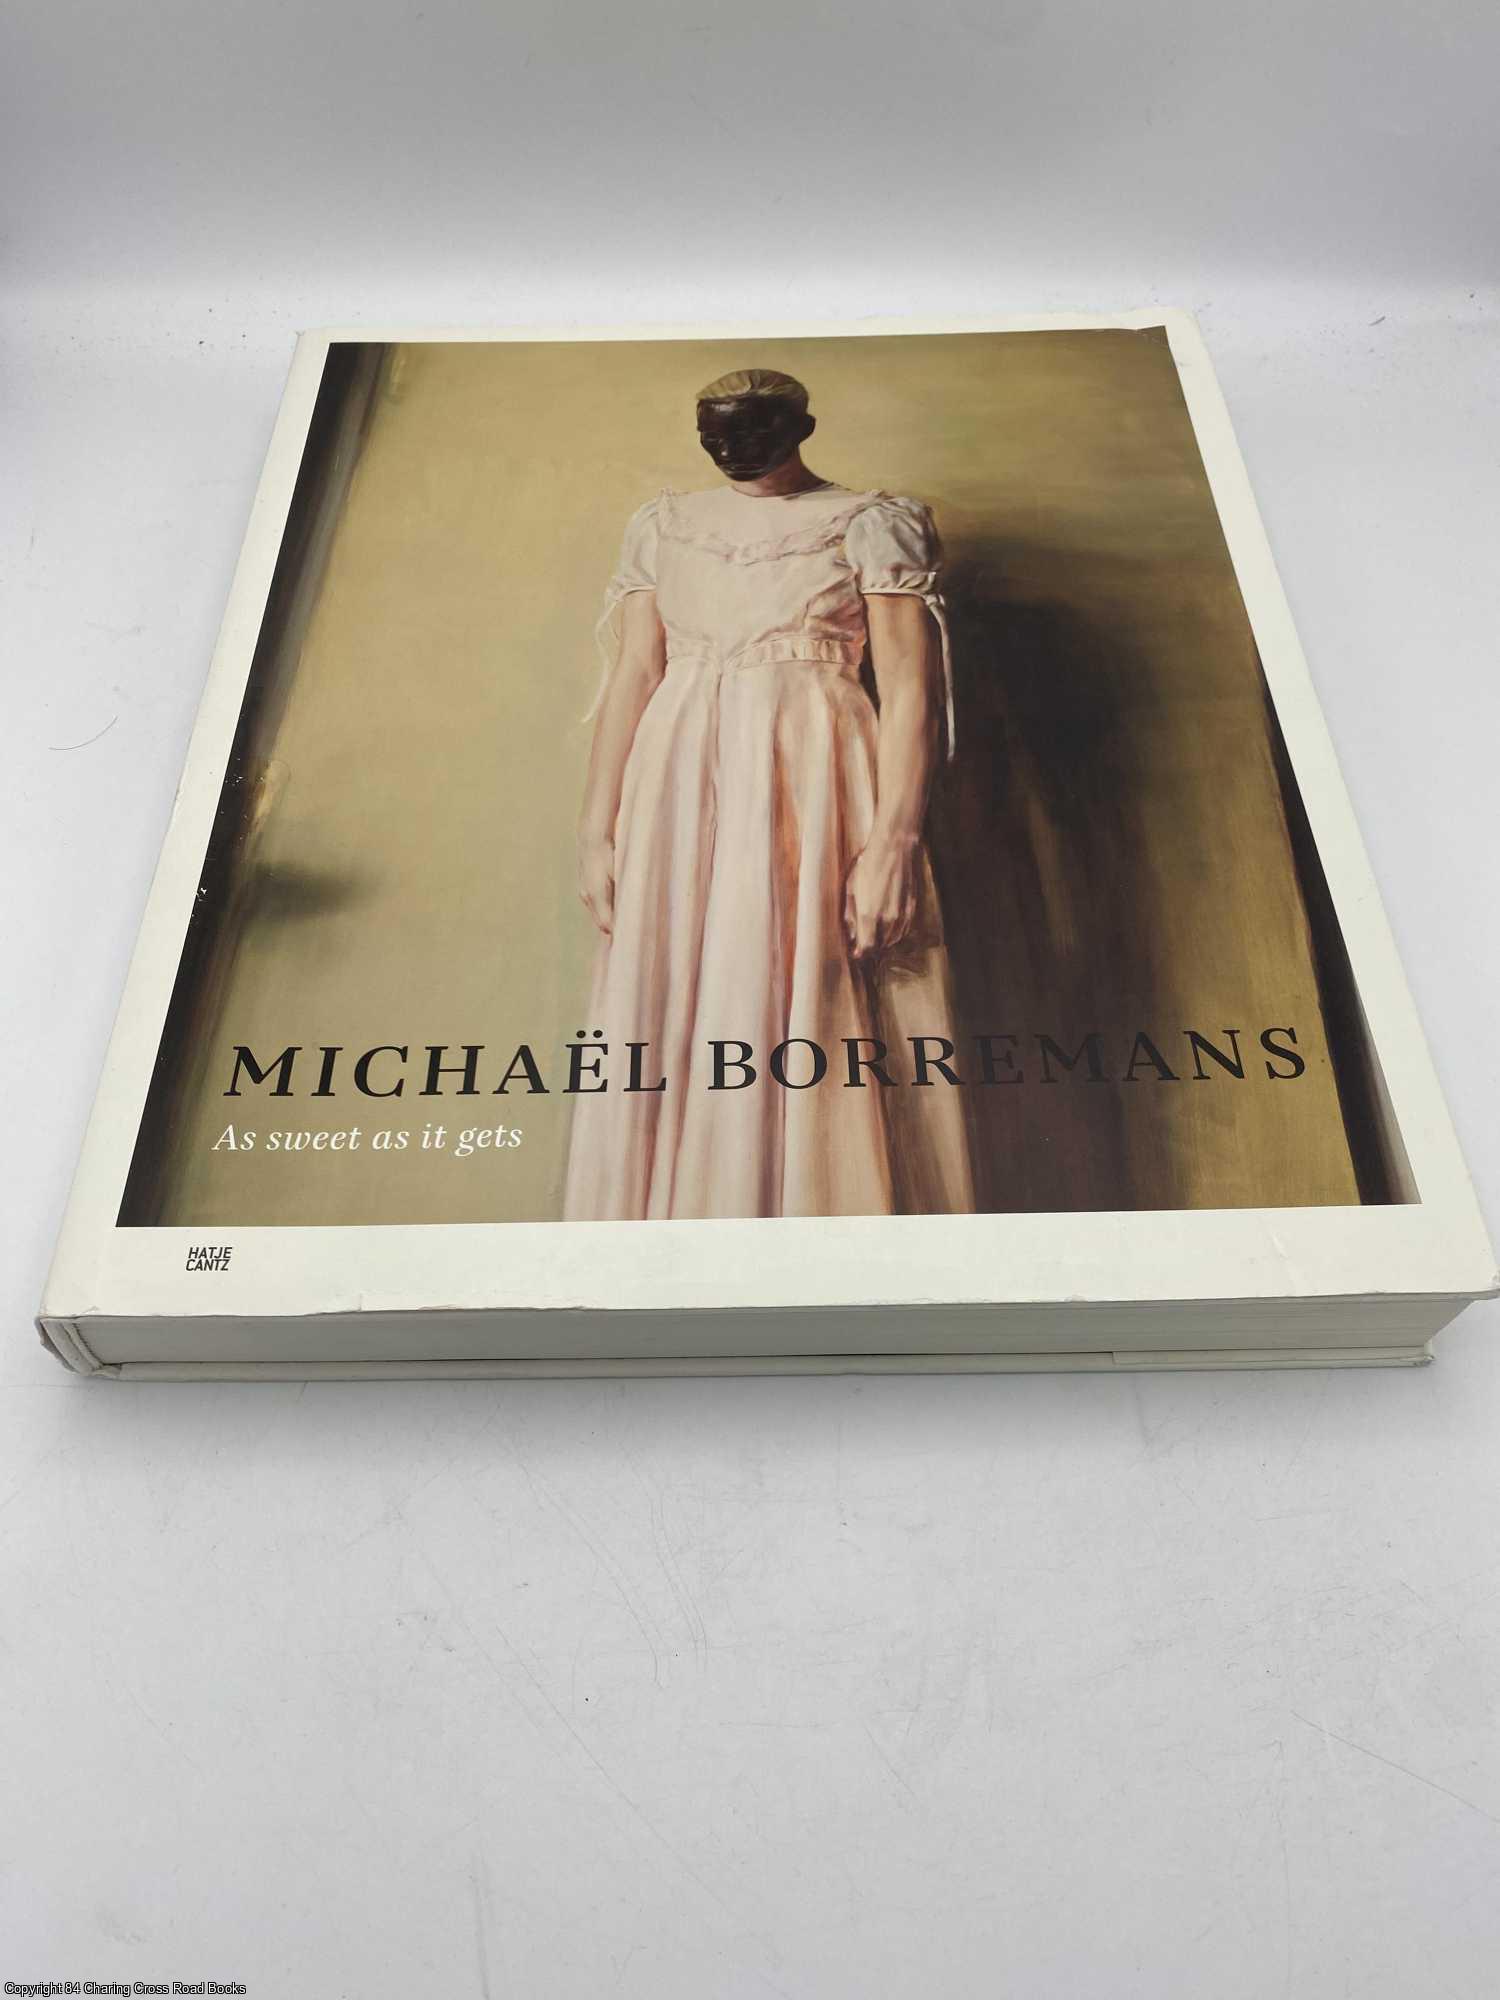 Michael Borremans As Sweet as It Gets by Grove, Amy, Borremans on 84  Charing Cross Rare Books